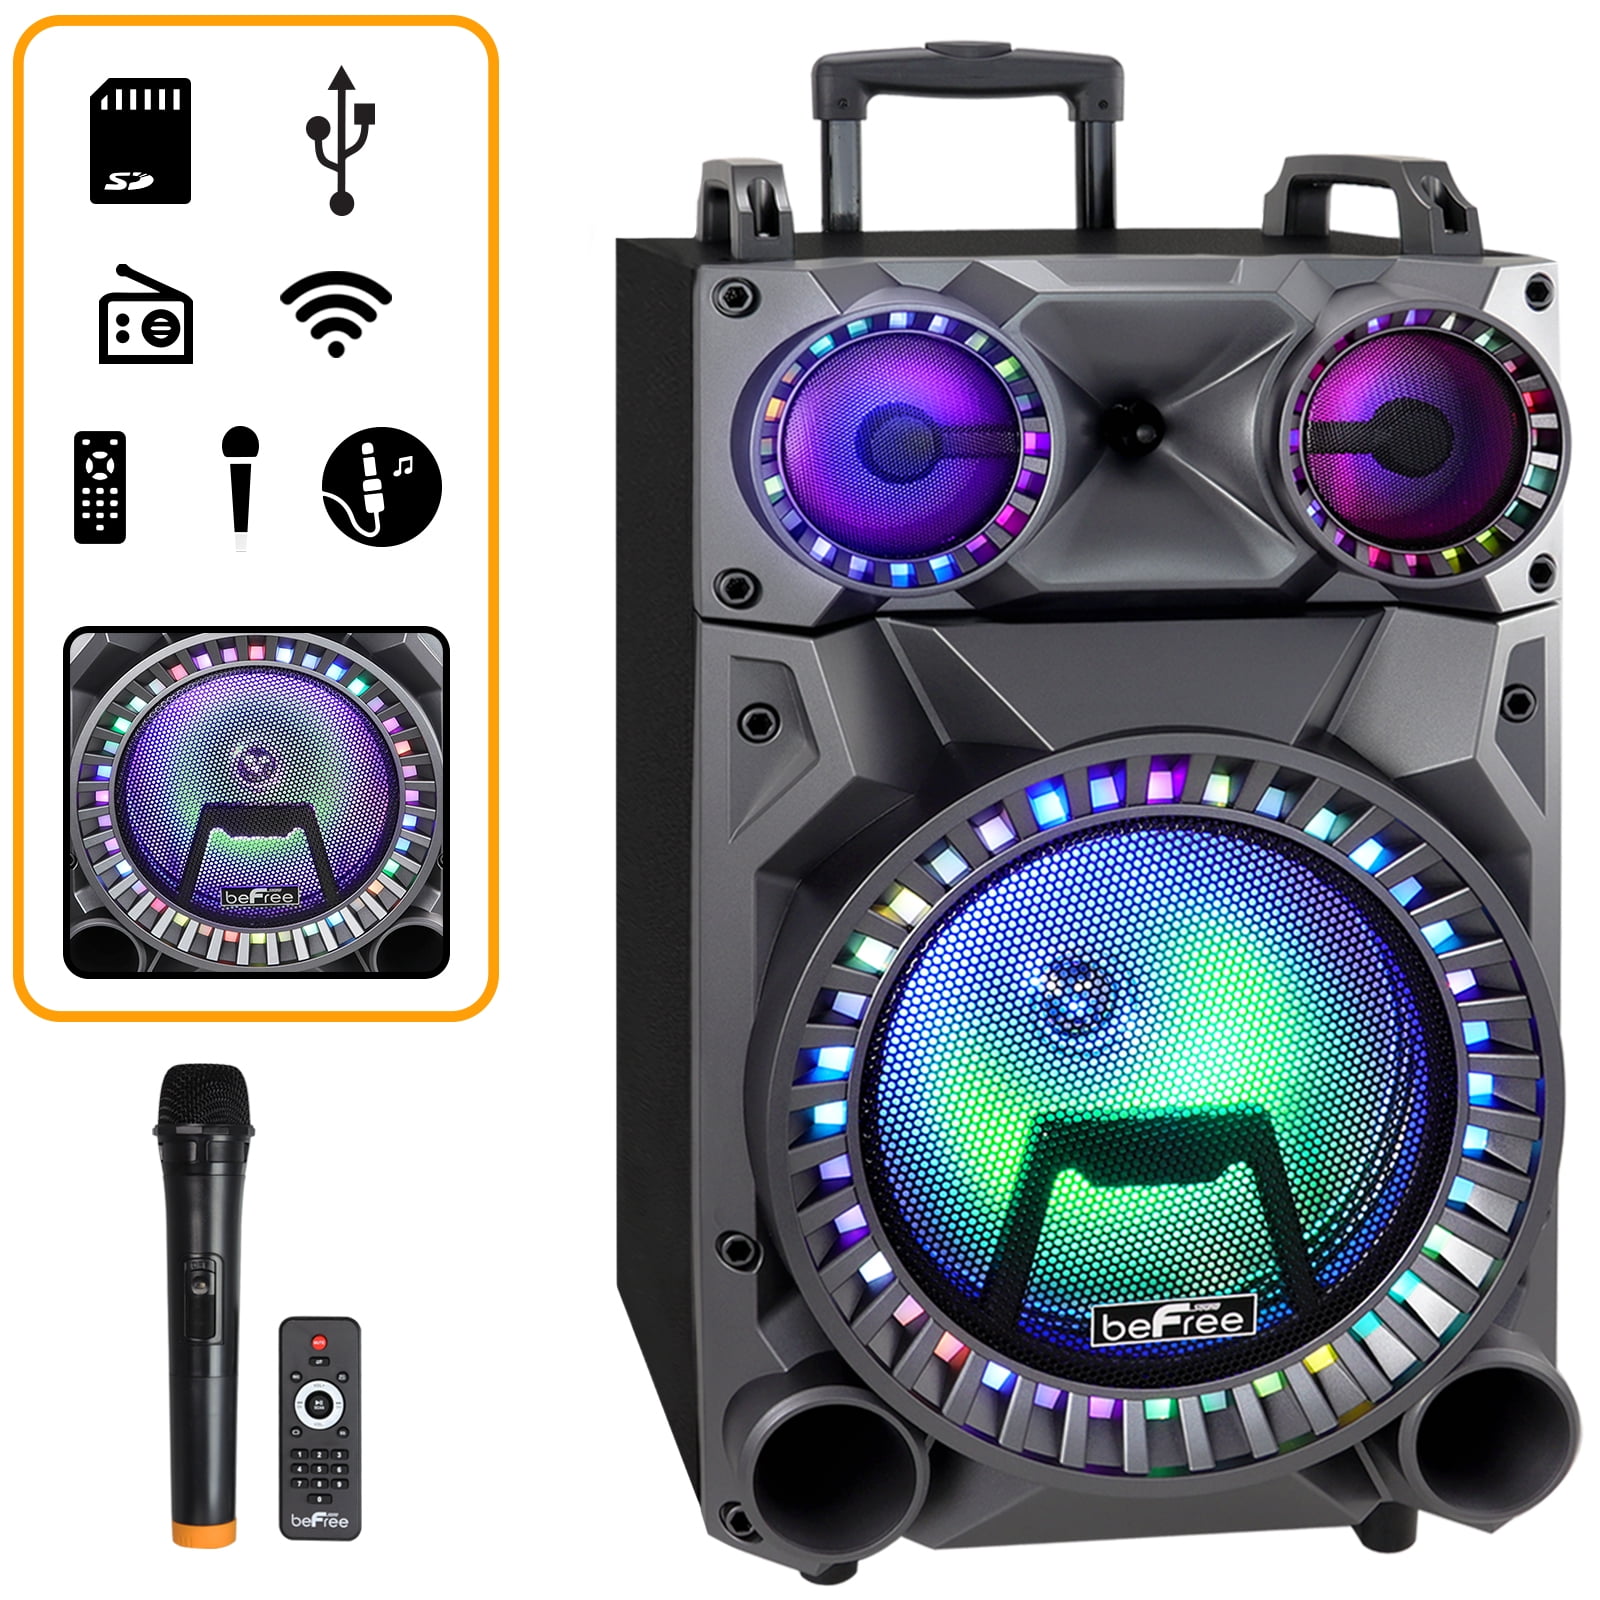 Rechargeable PA System with 2 Wireless Microphones/LED Party Lights STARQUEEN 12Inch Portable Bluetooth Speaker AUX/USB/TF Input/FM Radio/Holes for Tripod Stand 